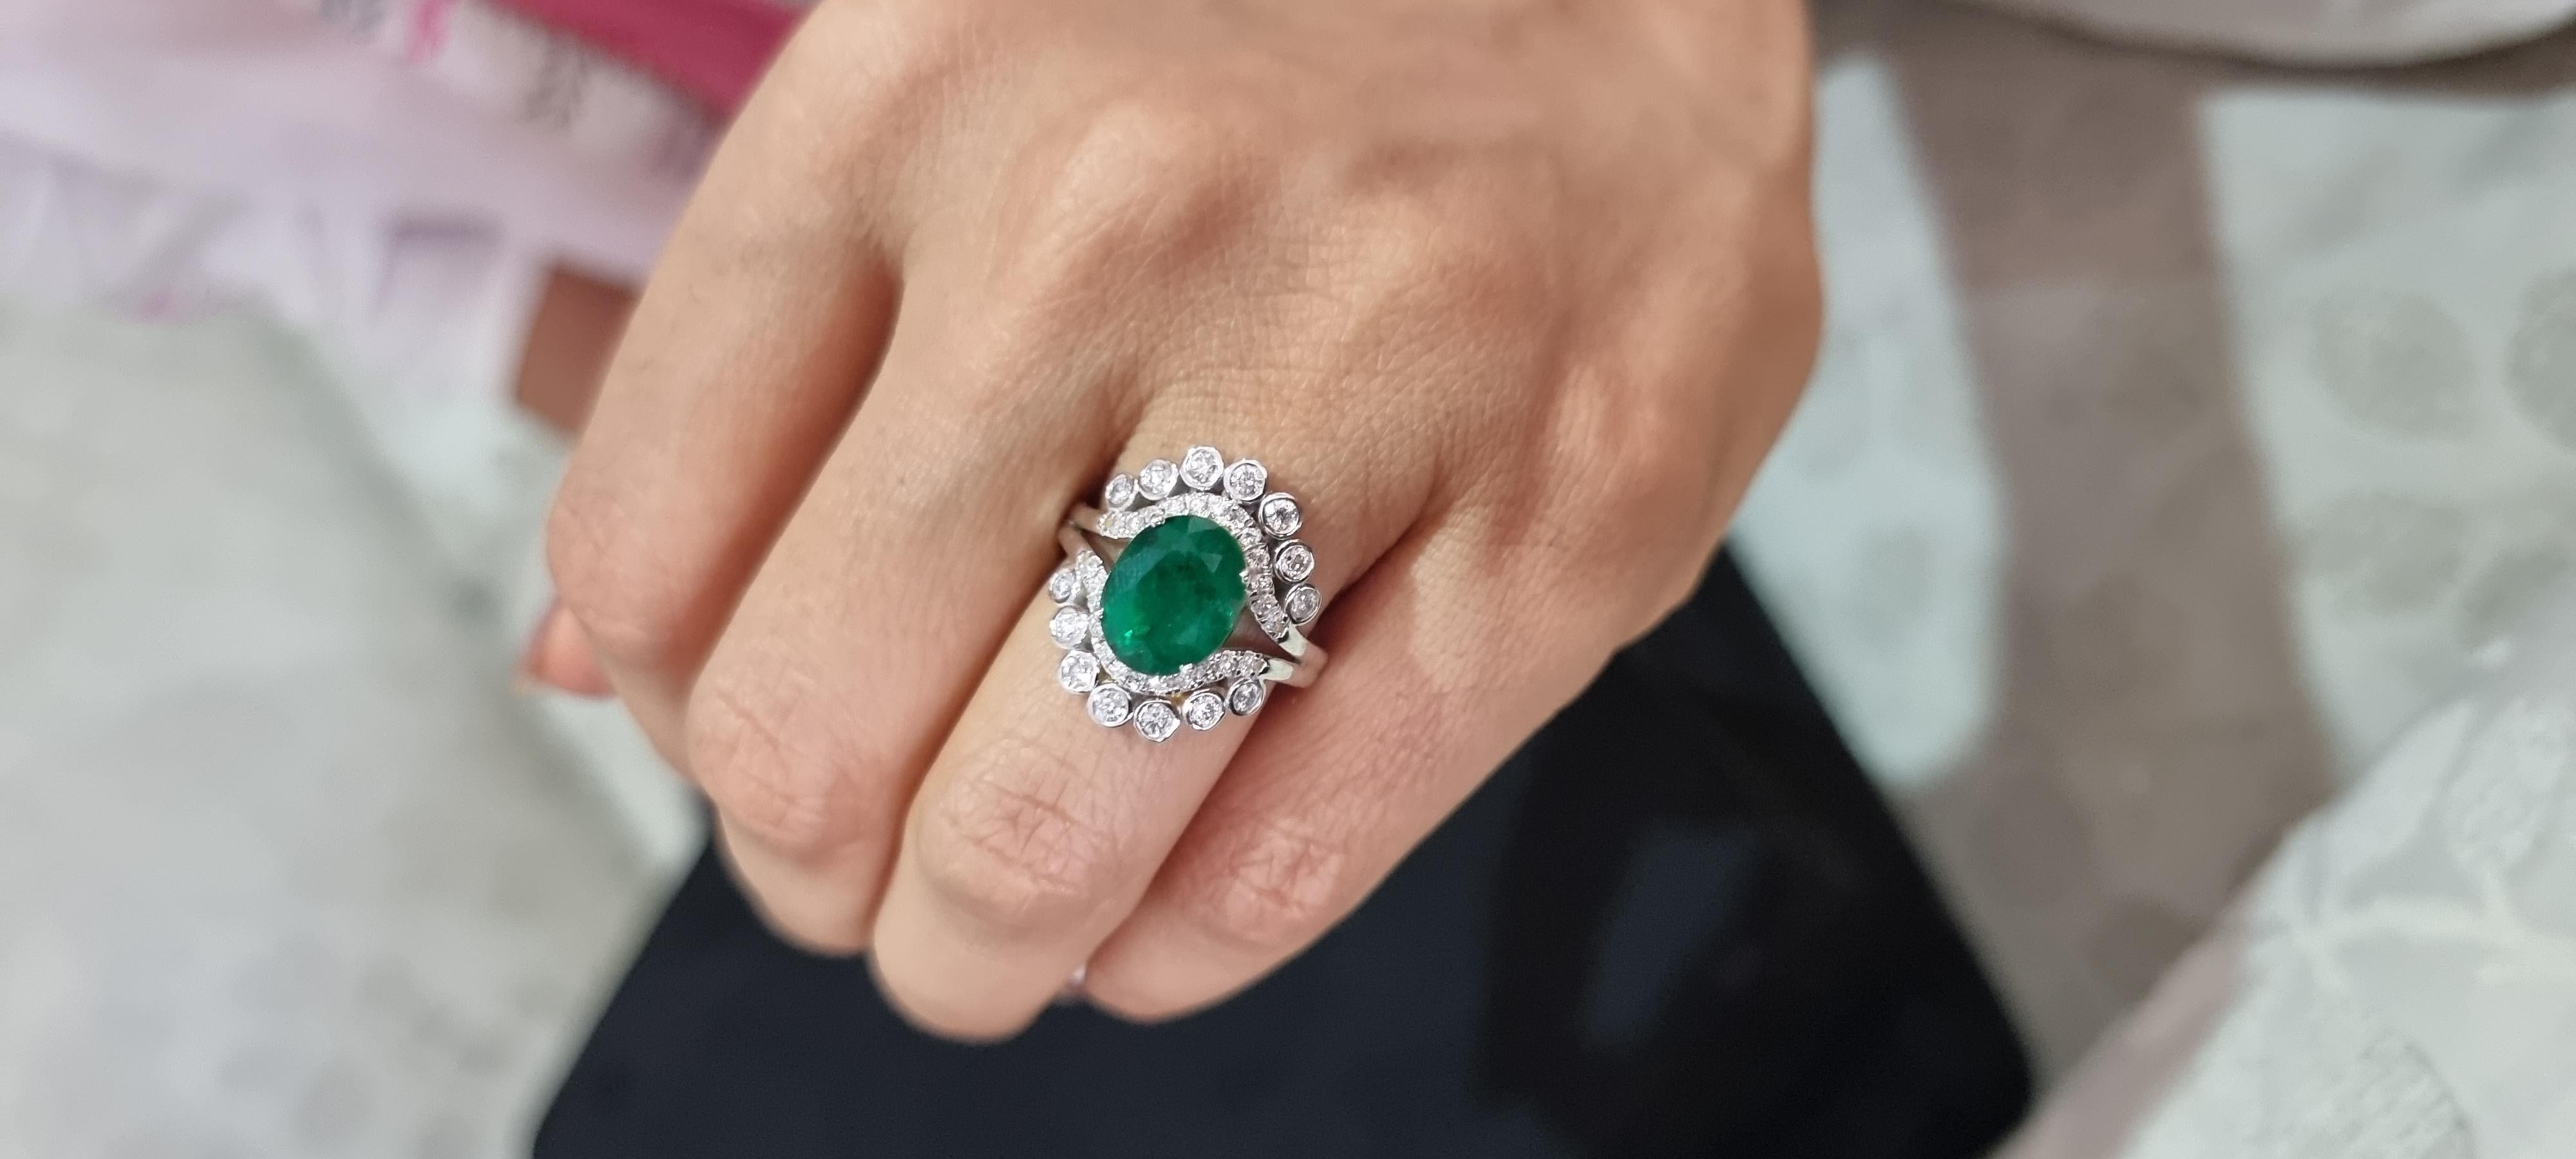 Women's or Men's 2.96cts Zambian Emerald Ring with 0.65cts Diamonds and 14k Gold For Sale